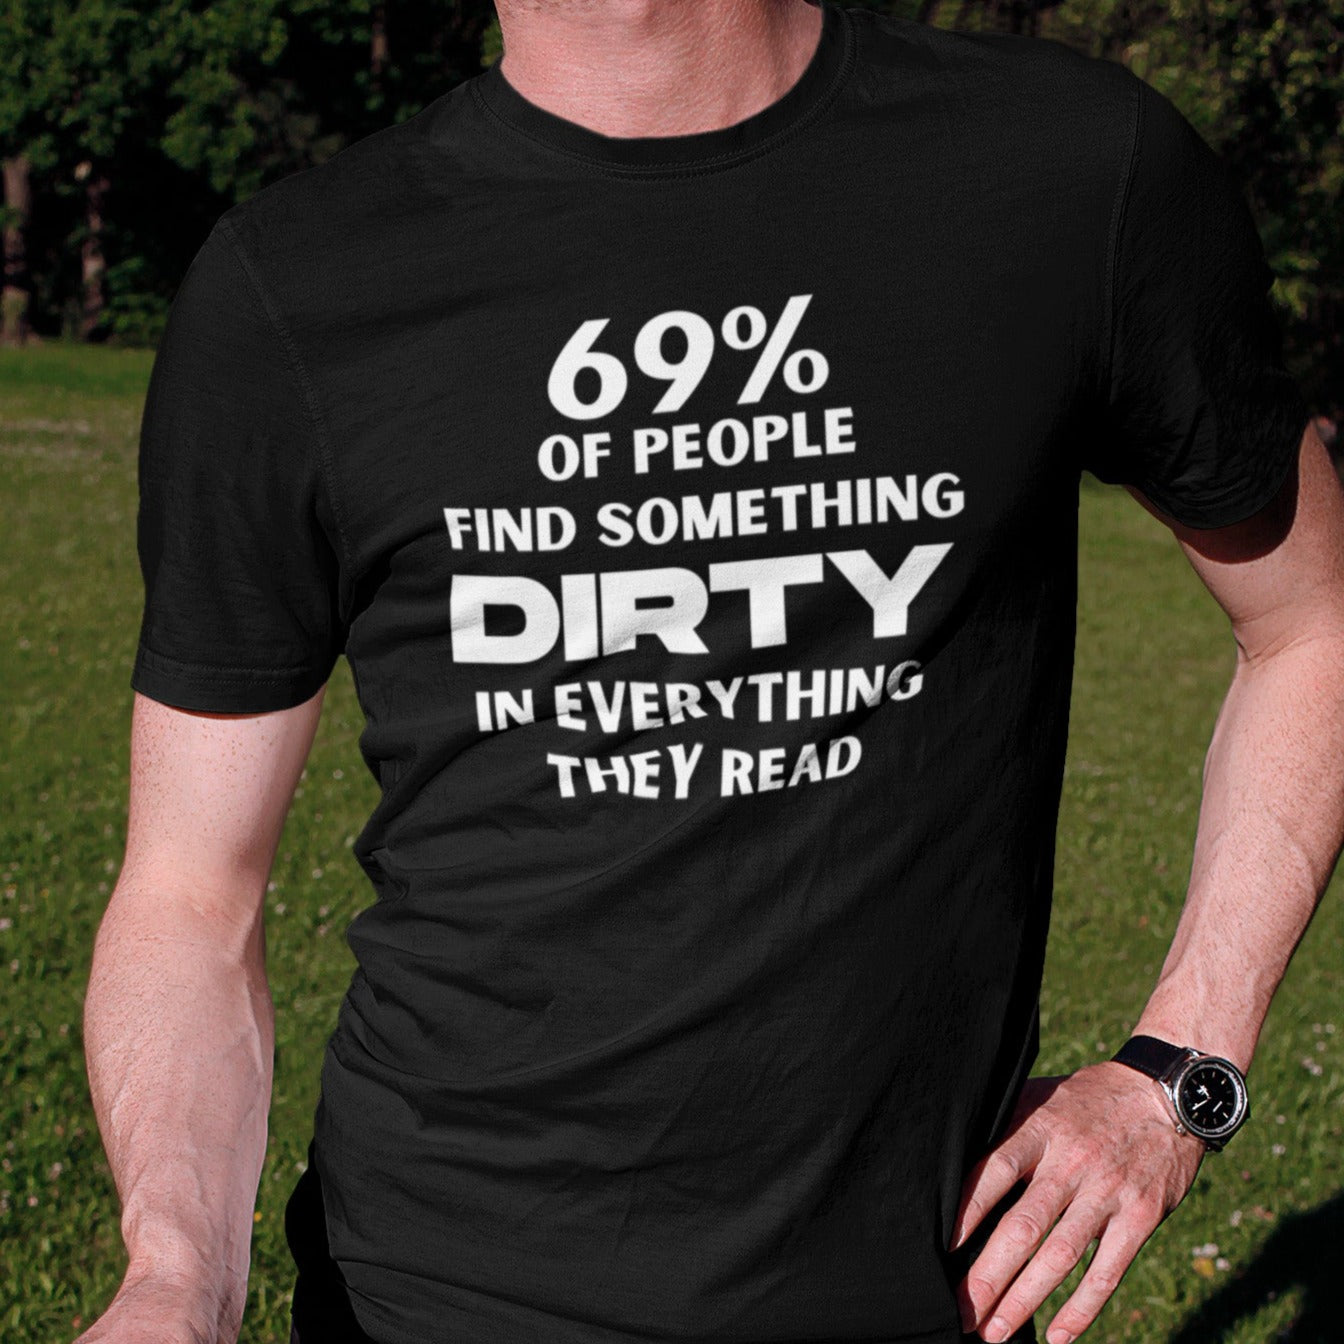 69-percent-of-people-find-something-dirty-in-everything-they-read-black-t-shirt-unisex-funny-mockup-of-a-man-posing-with-his-bicycle